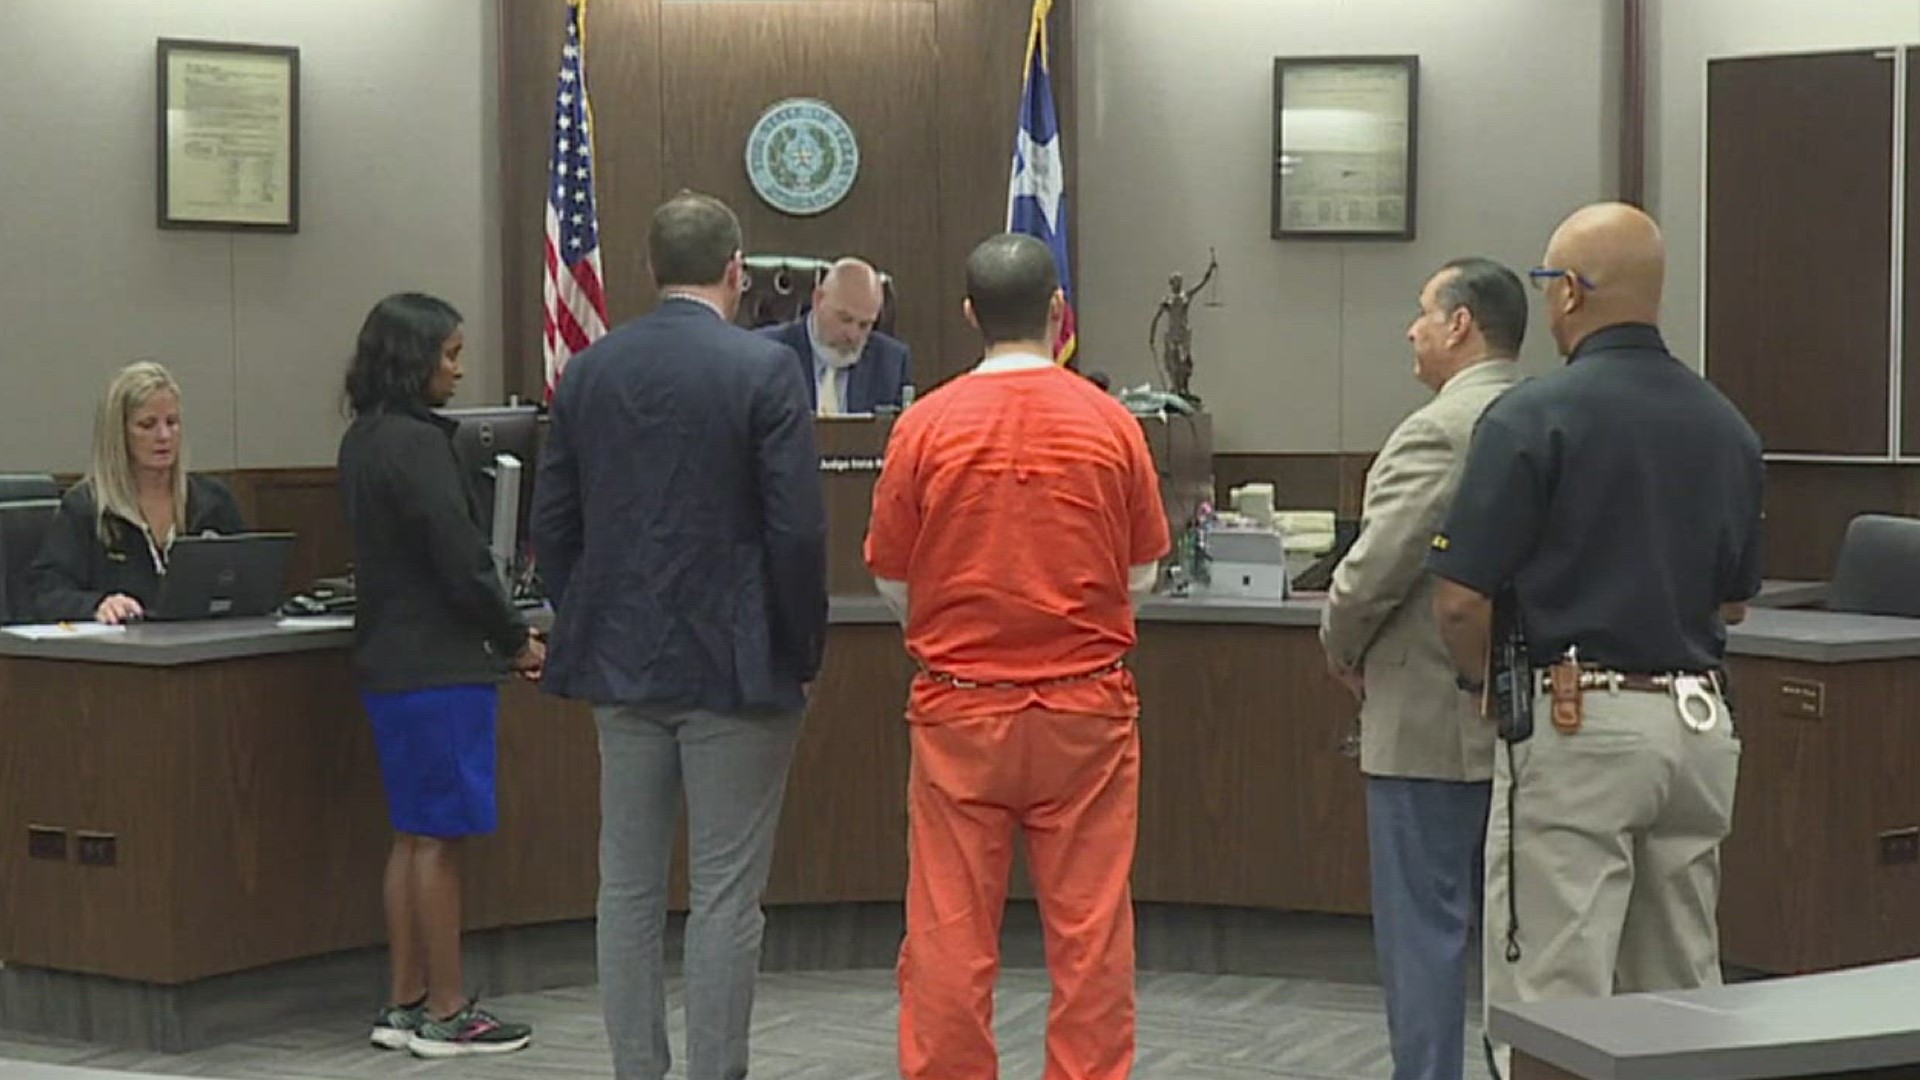 Ramon was back in court Tuesday for a pre-court hearing.